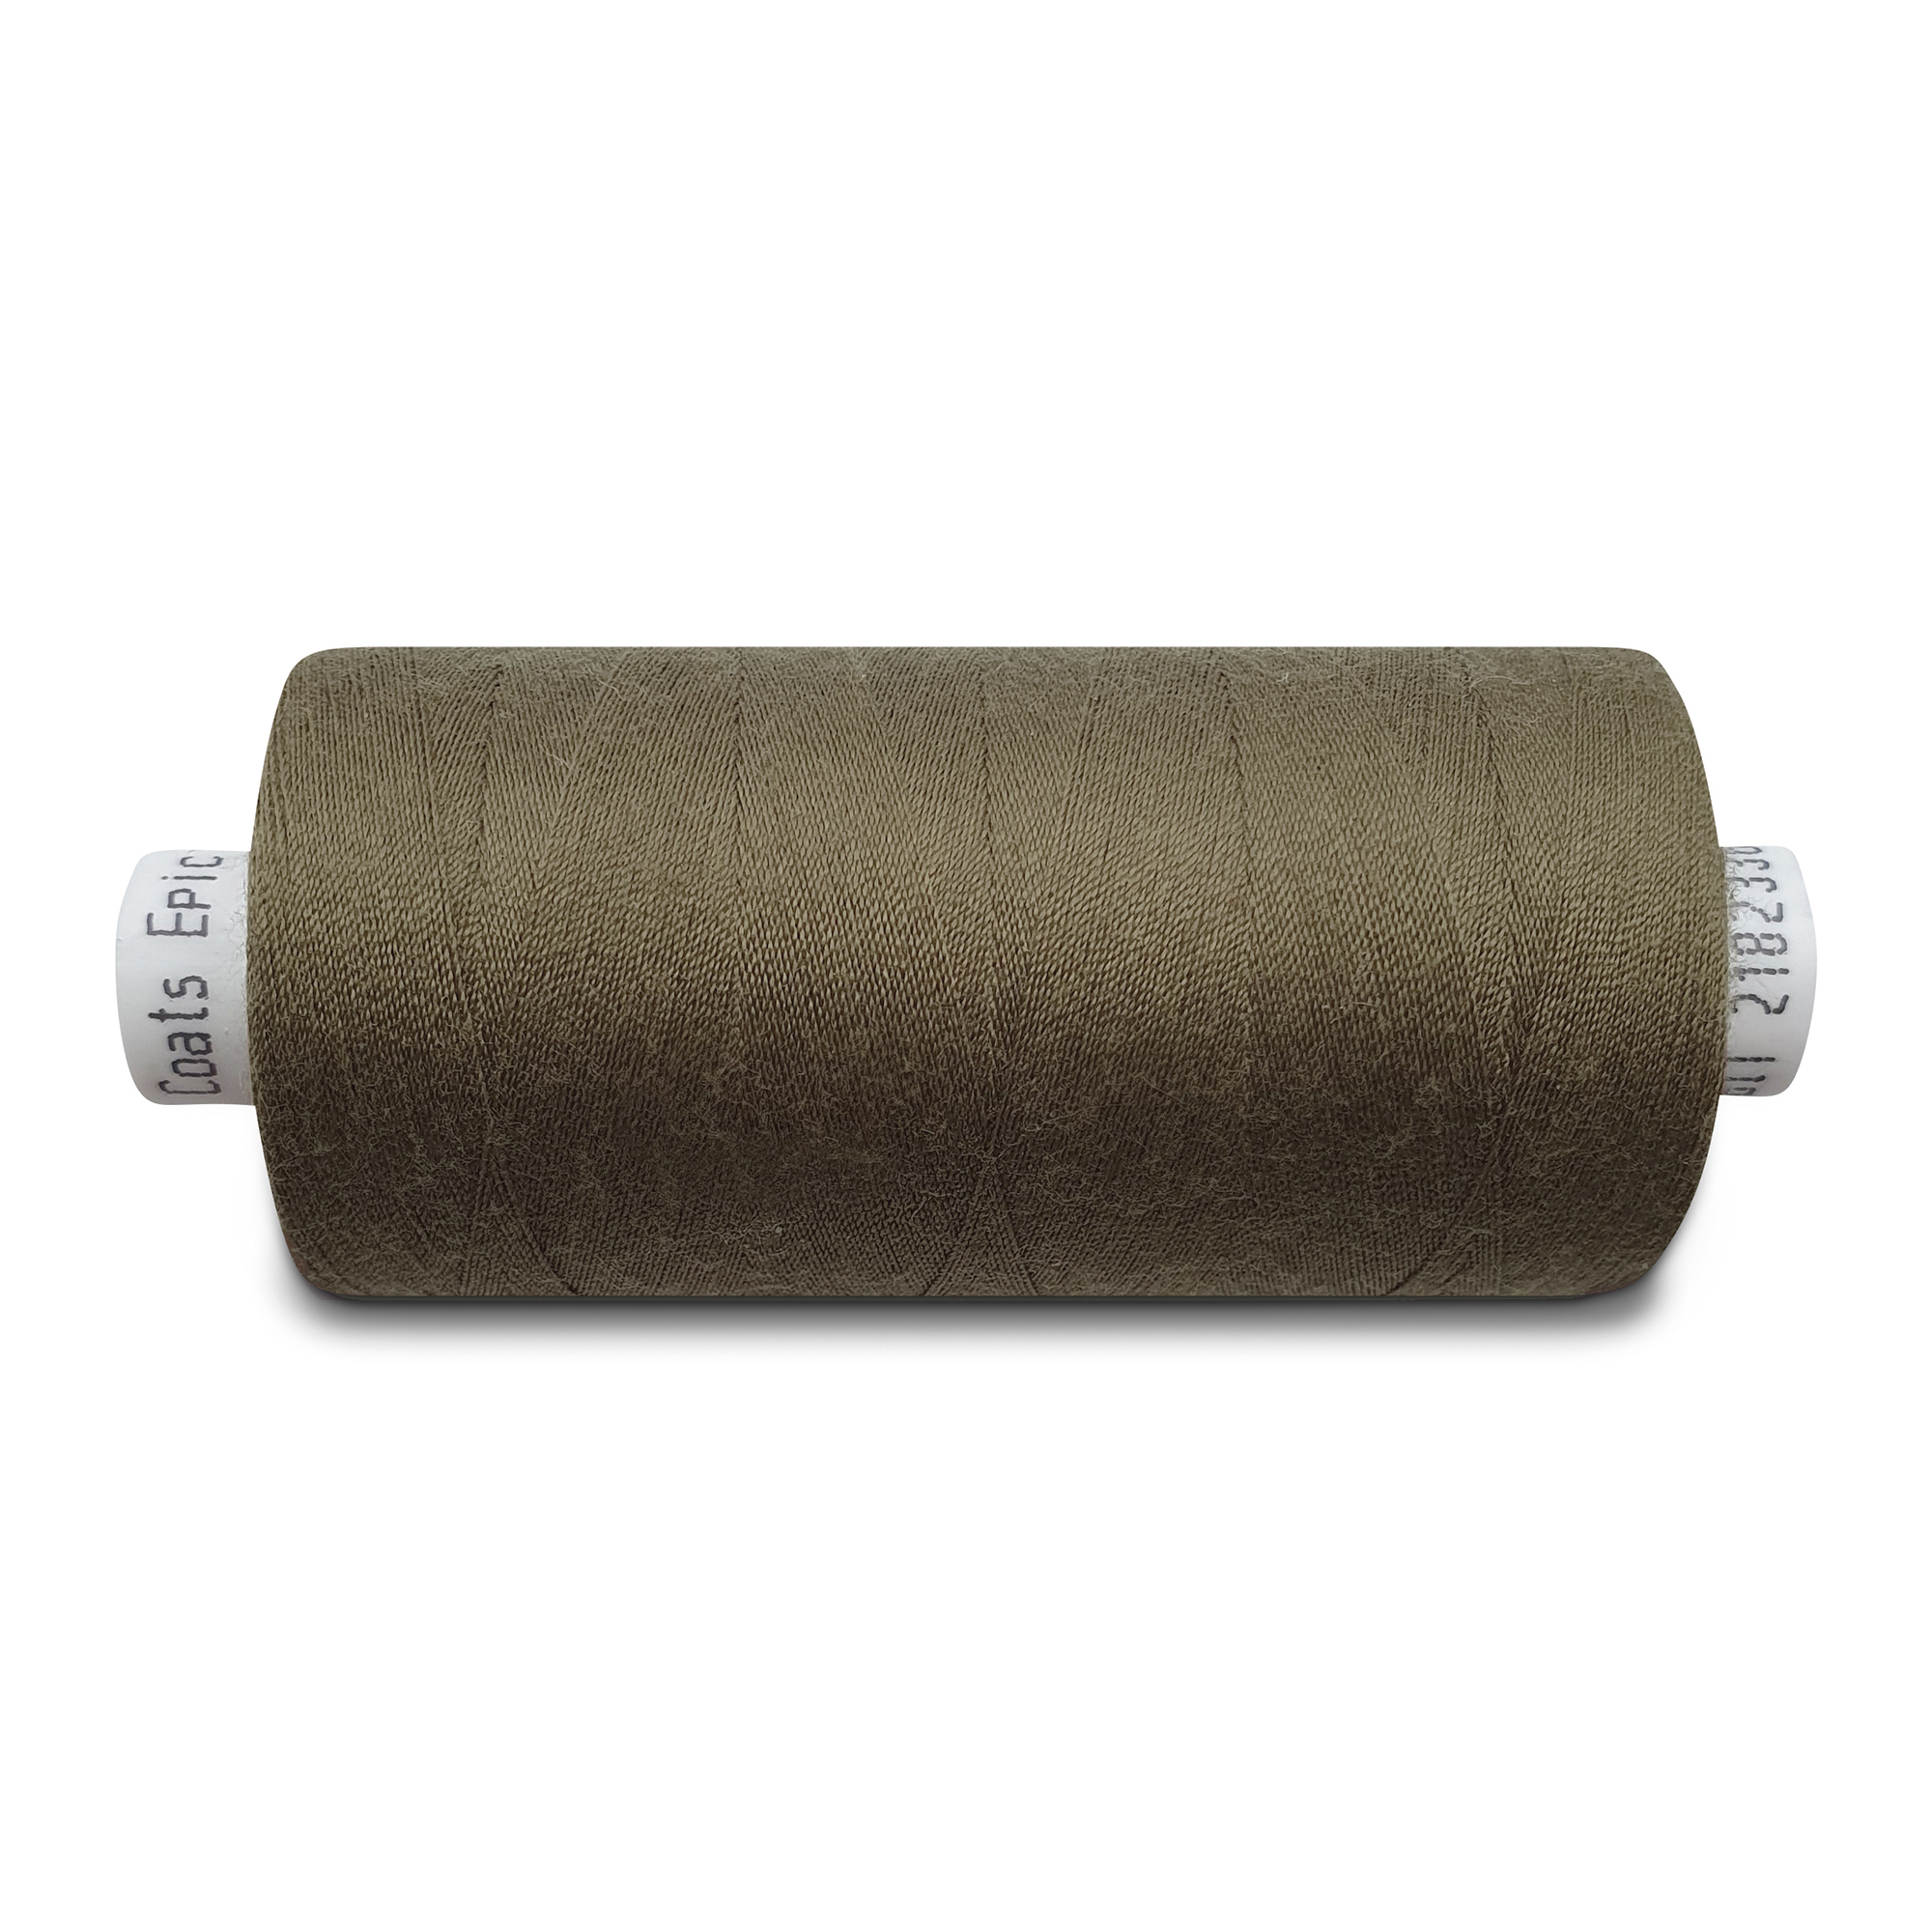 Leather/Sewing thread truffle olive brown